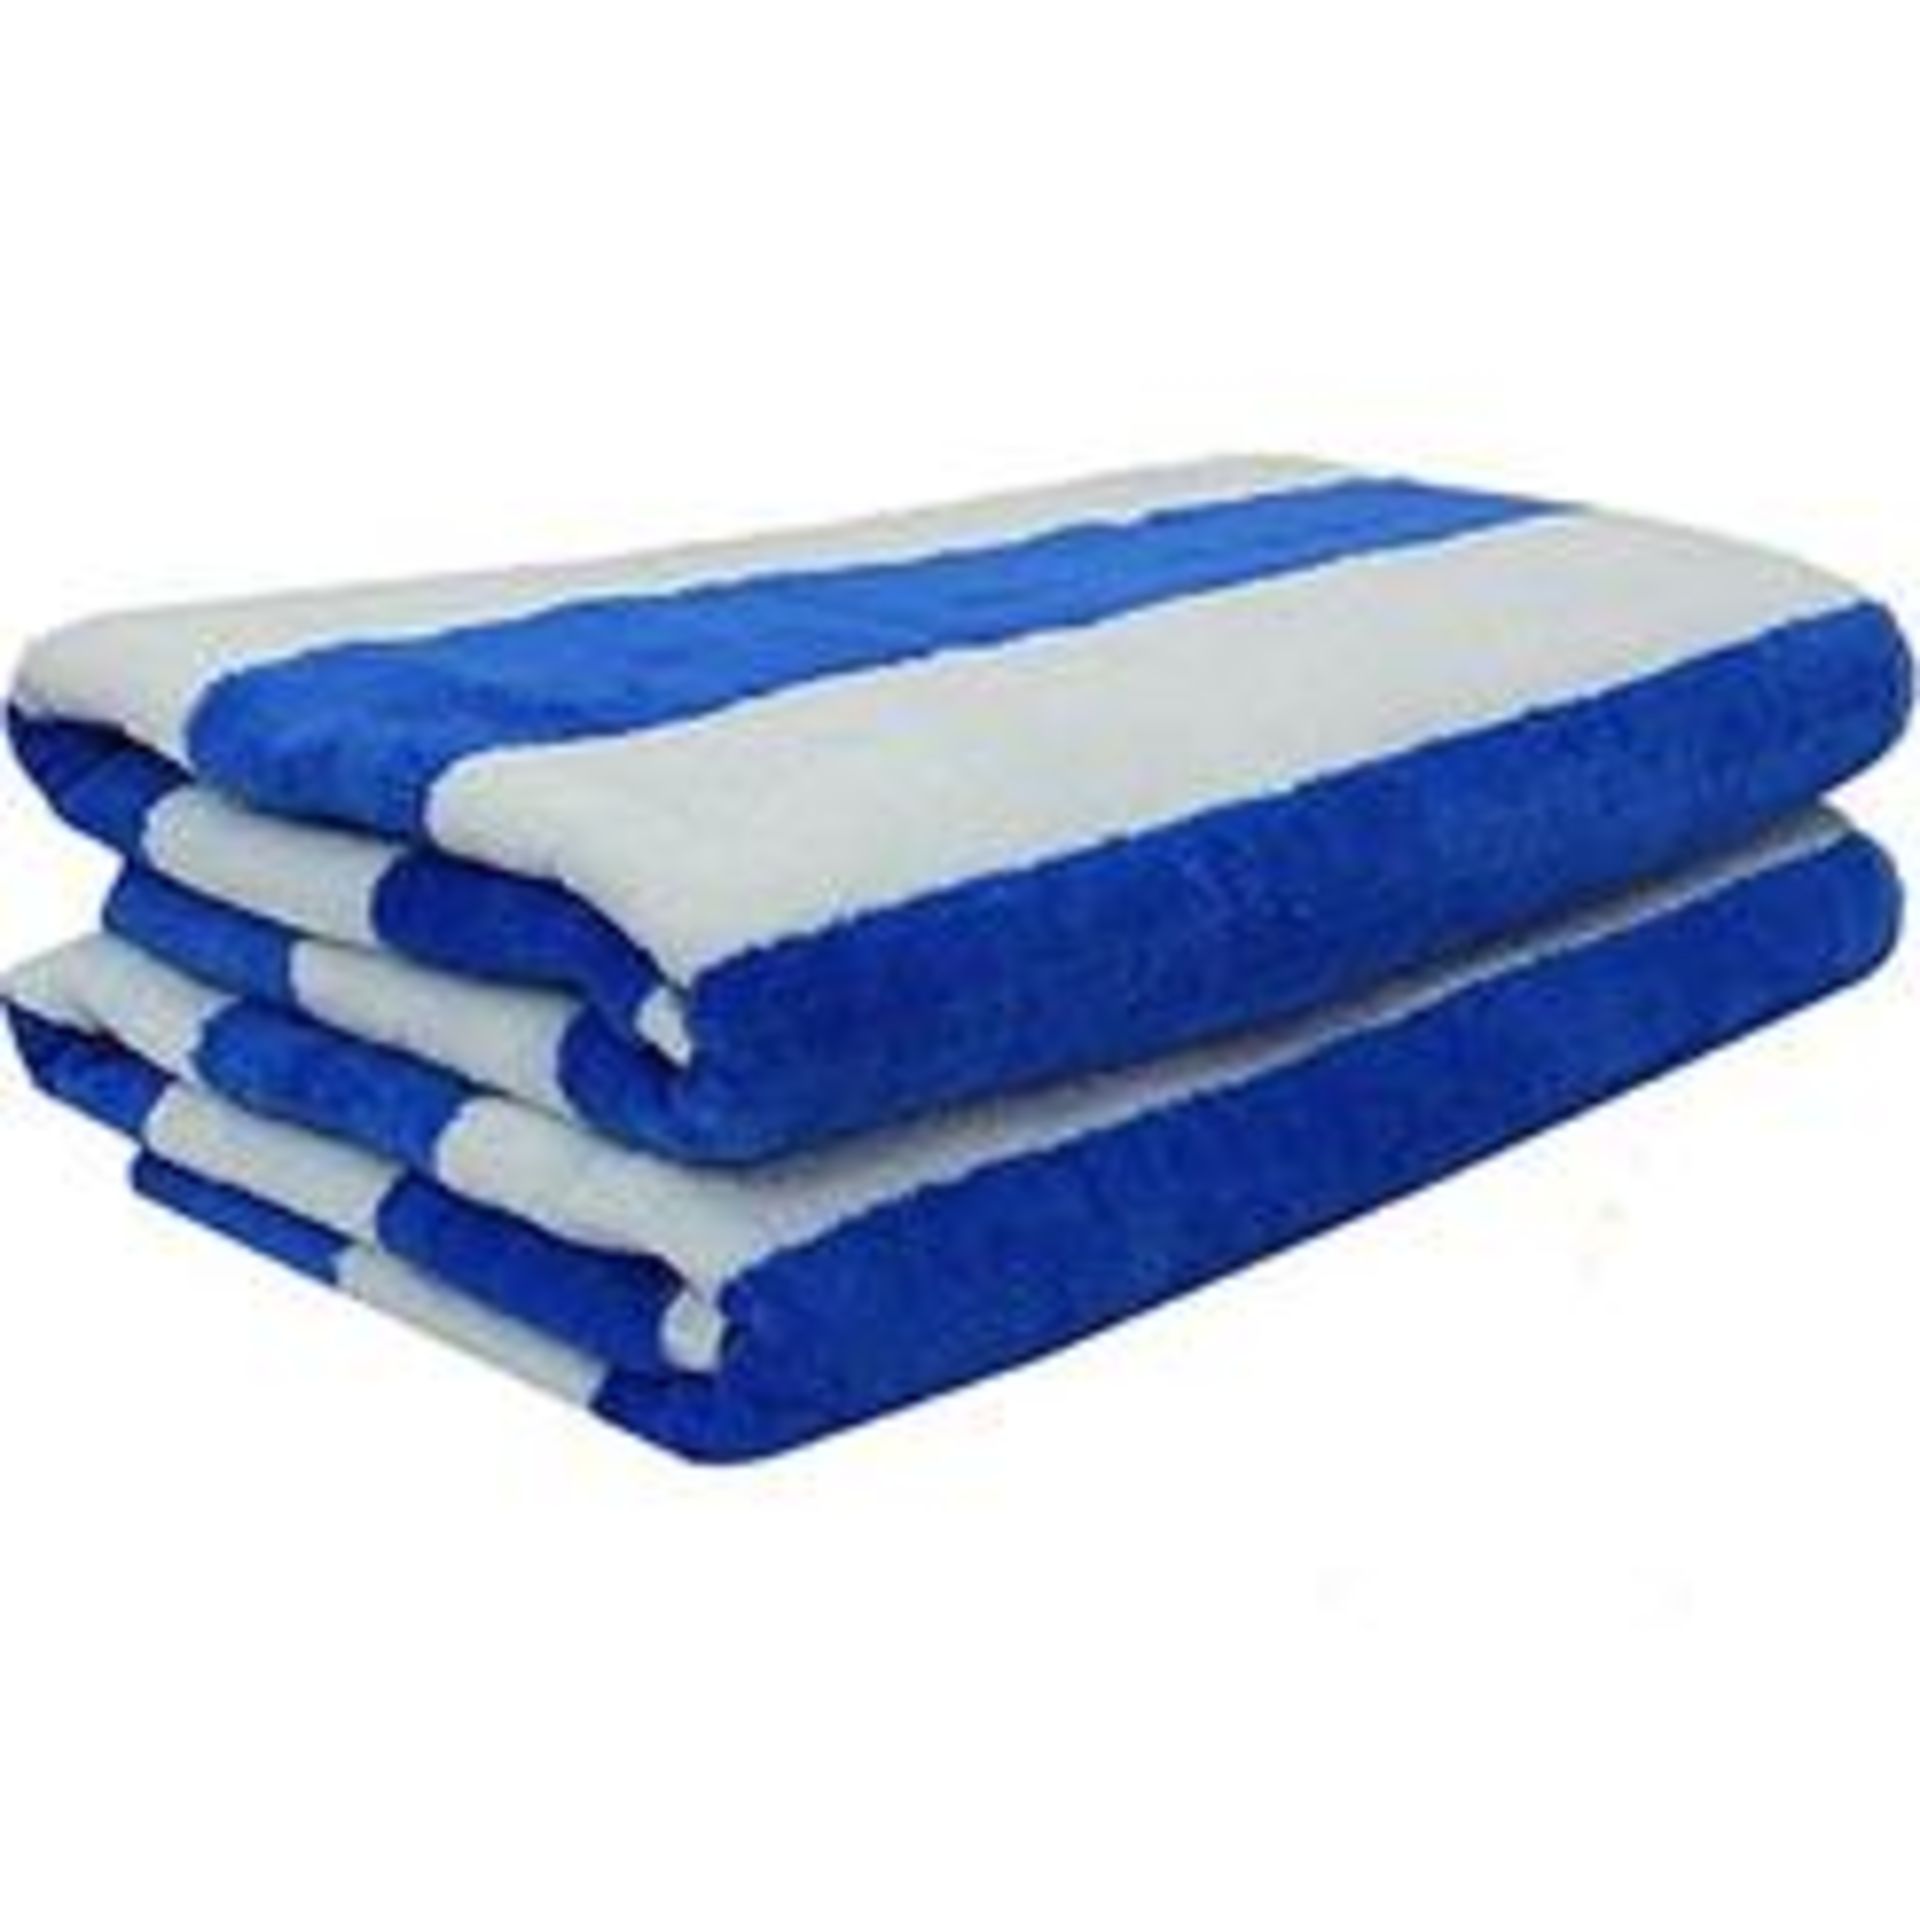 V *TRADE QTY* Grade A Blue & White Hotel/Beach Towel X 6 YOUR BID PRICE TO BE MULTIPLIED BY SIX